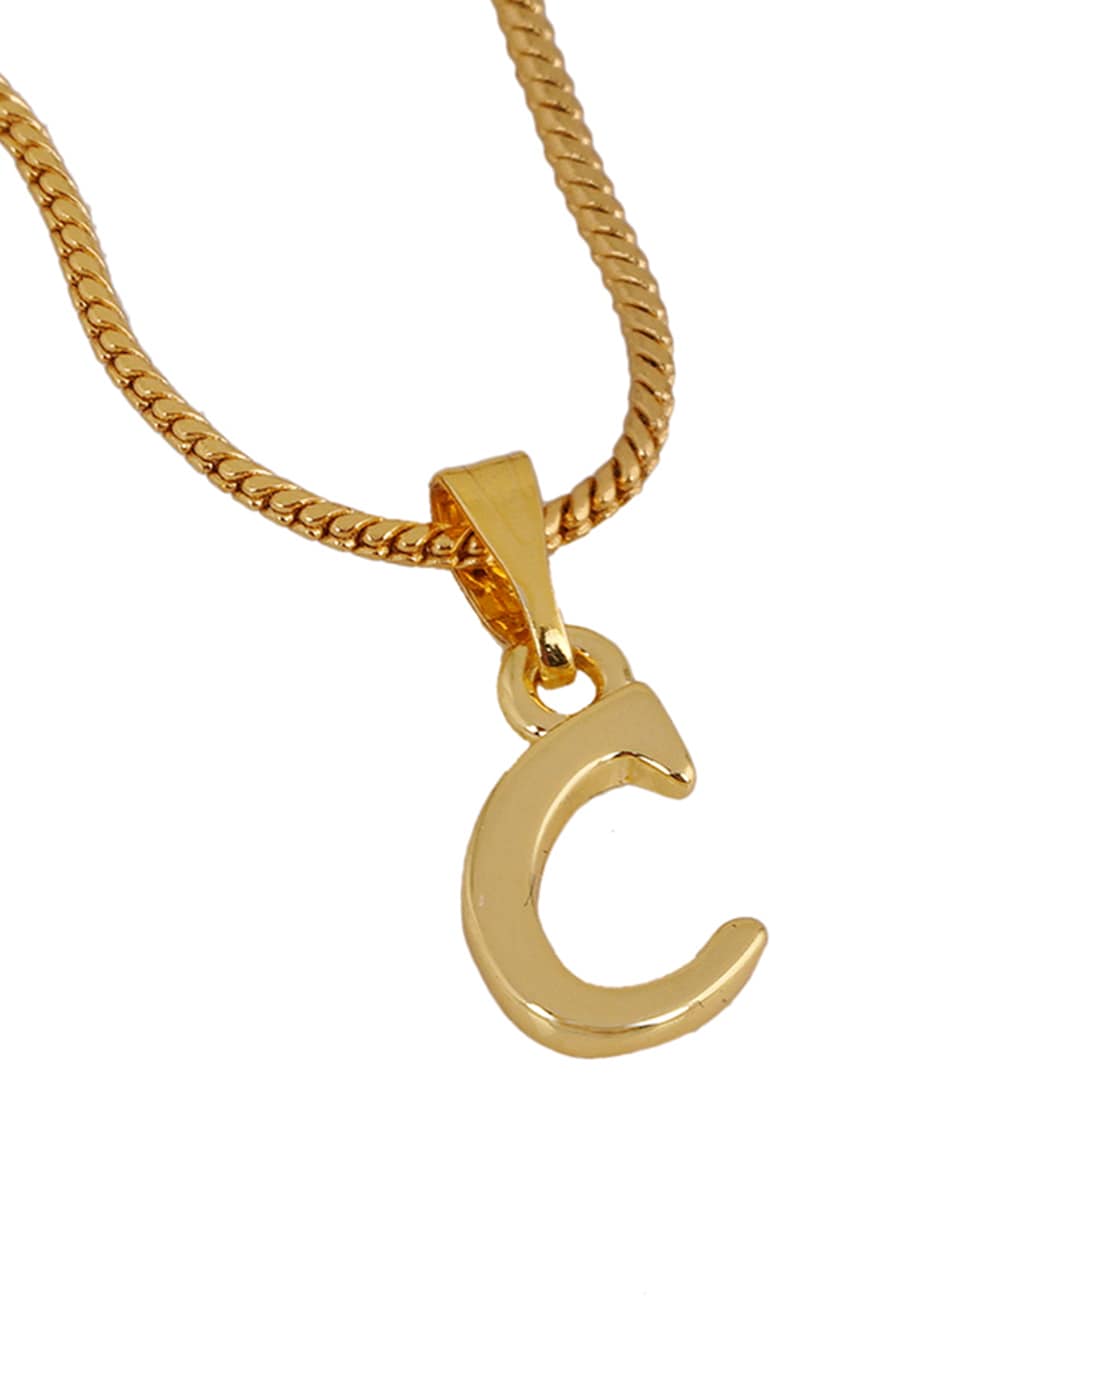 Women's Old English Initial Necklace 18K Gold Plated Stainless Steel Letter  Pendant Gift | Initial necklace, Letter pendants, Initial pendant necklace